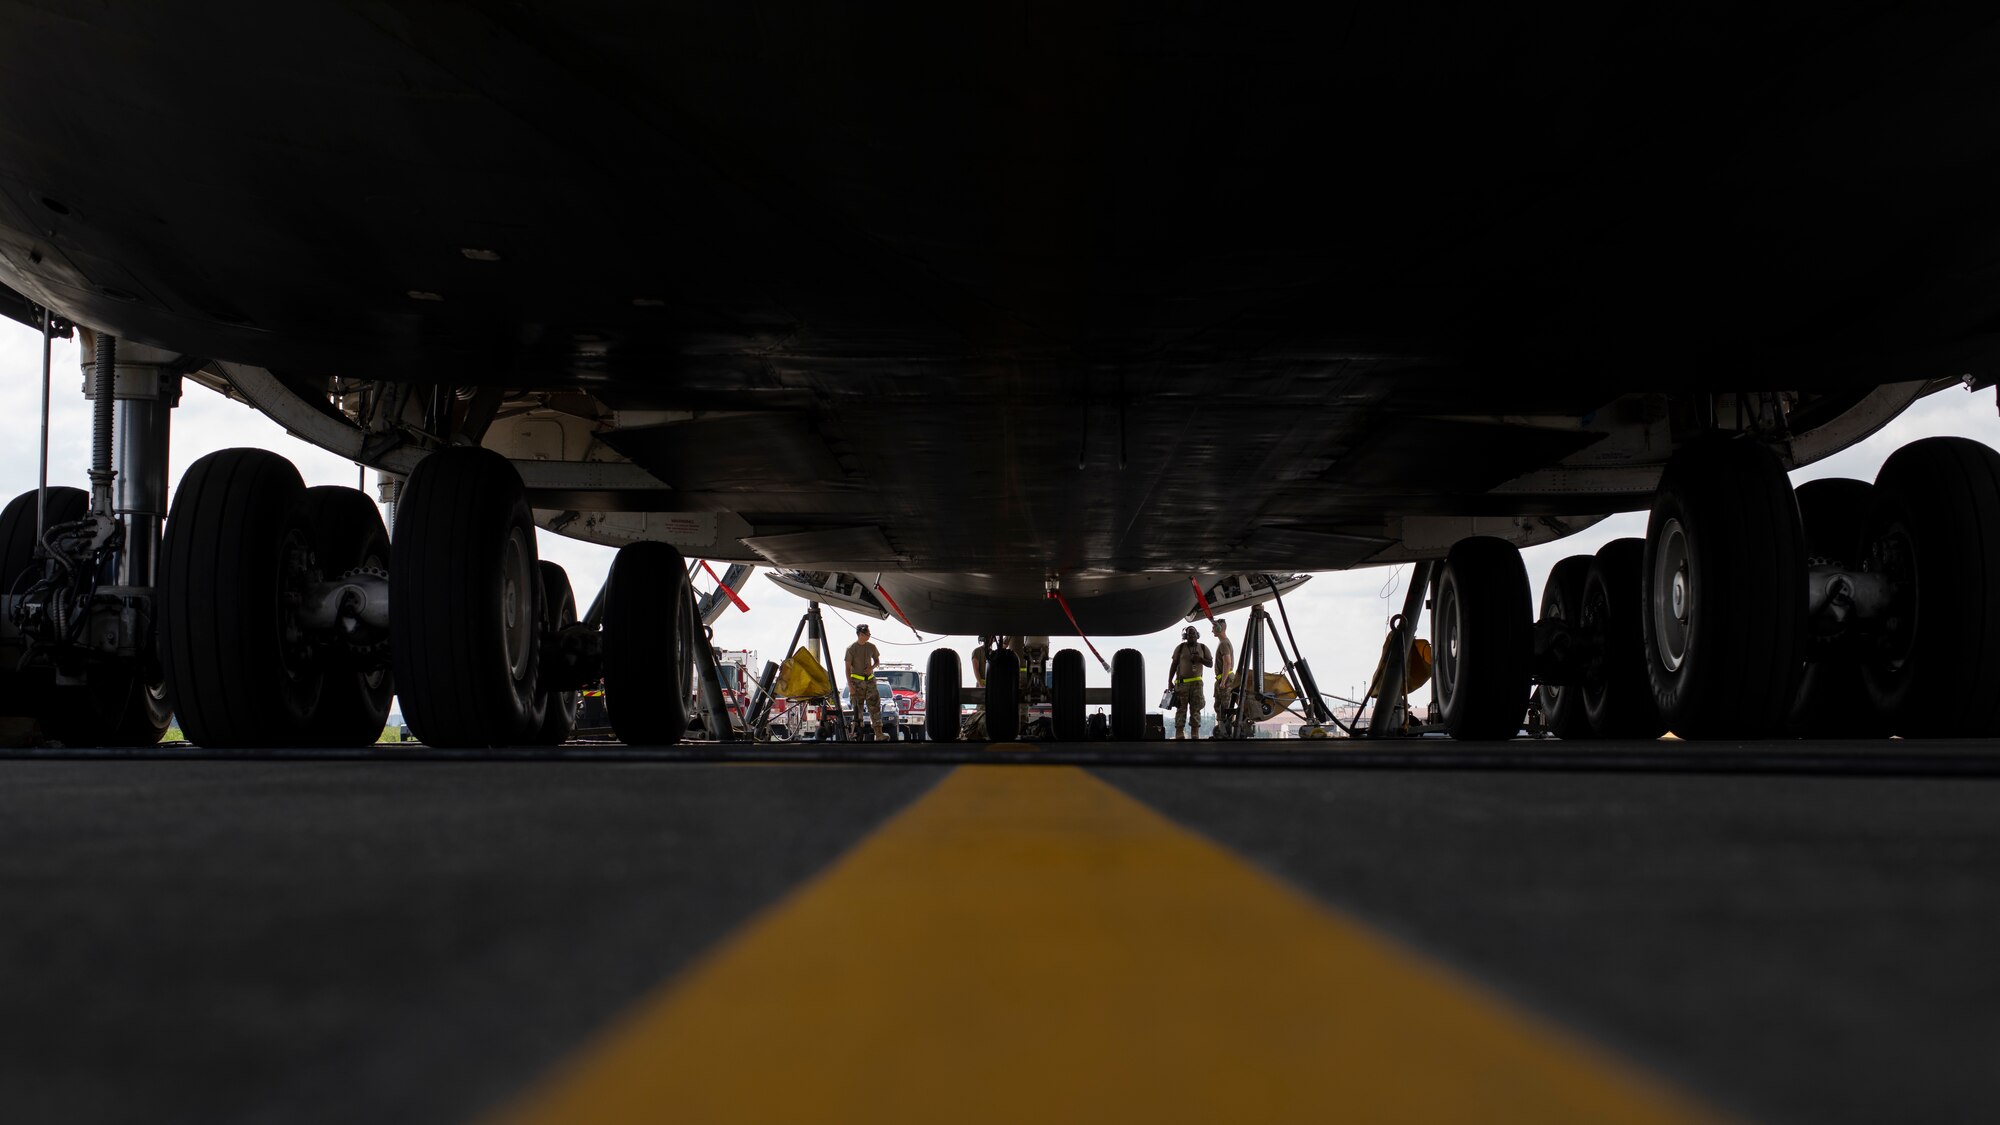 The underside of a very large cargo plane with several maintainer Airmen peering underneath from the far end